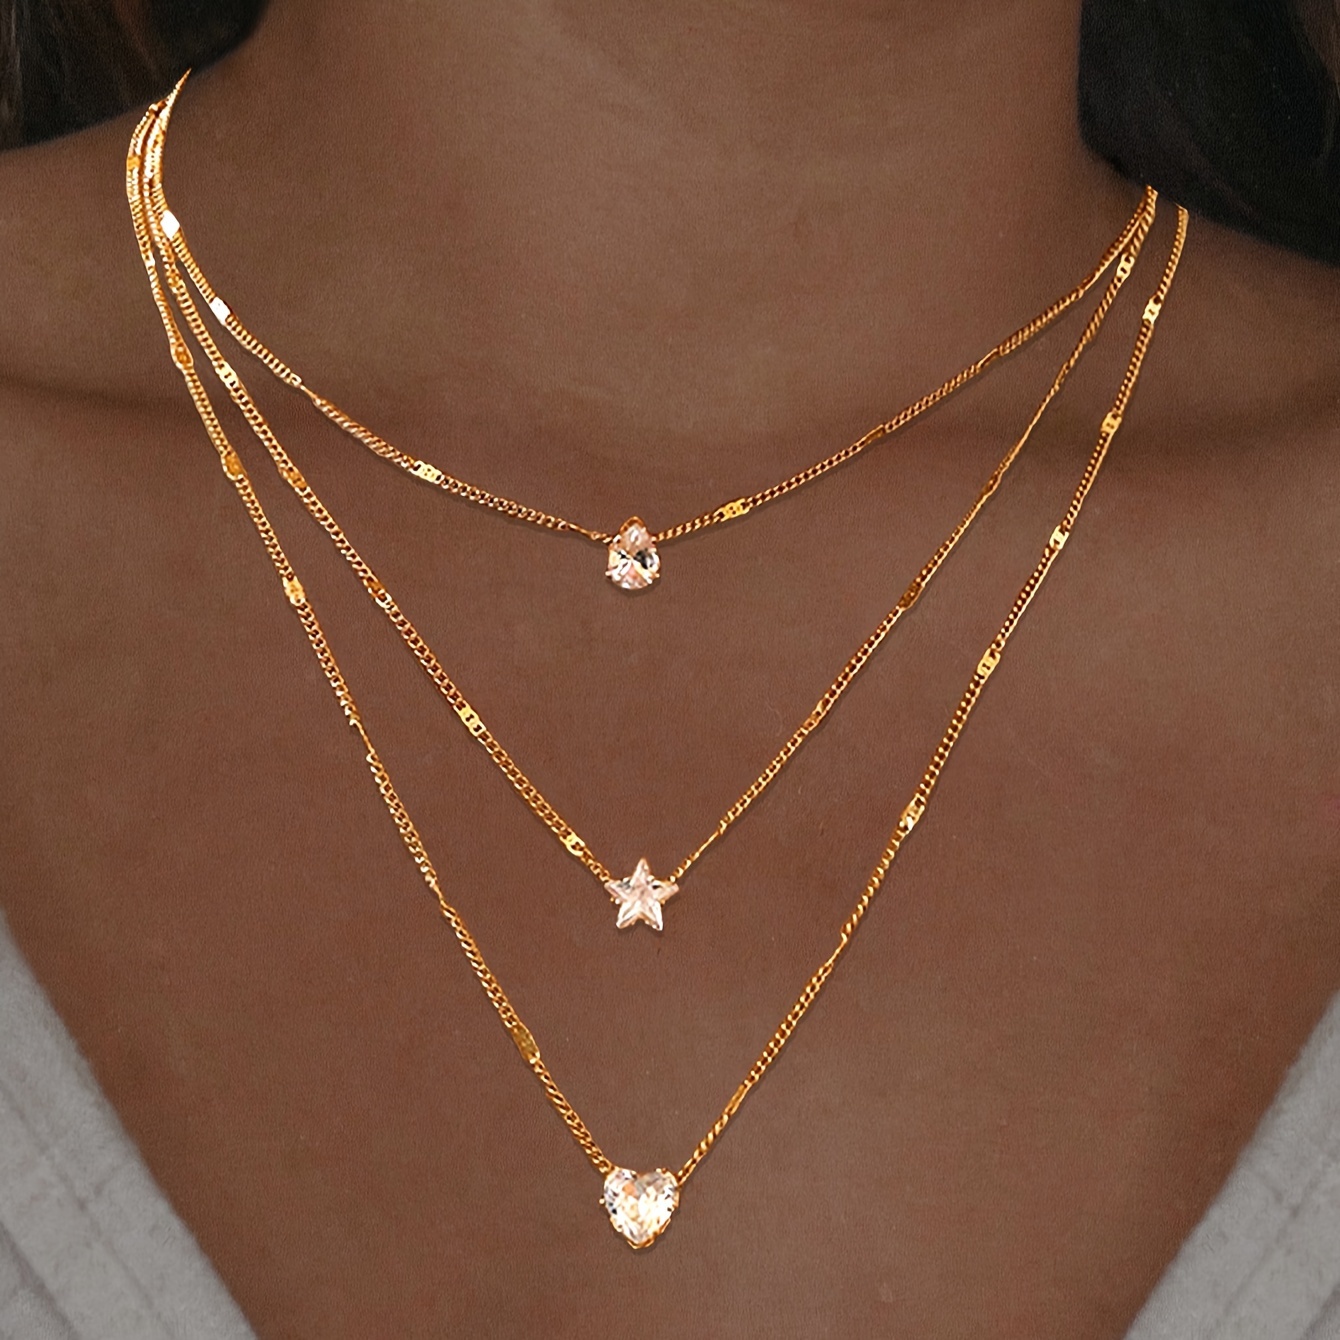 

3-layer Necklace With Rhinestone Pendants - Heart, Star, And Teardrop, Perfect For Holidays And Everyday Wear - Retro & Chic Style